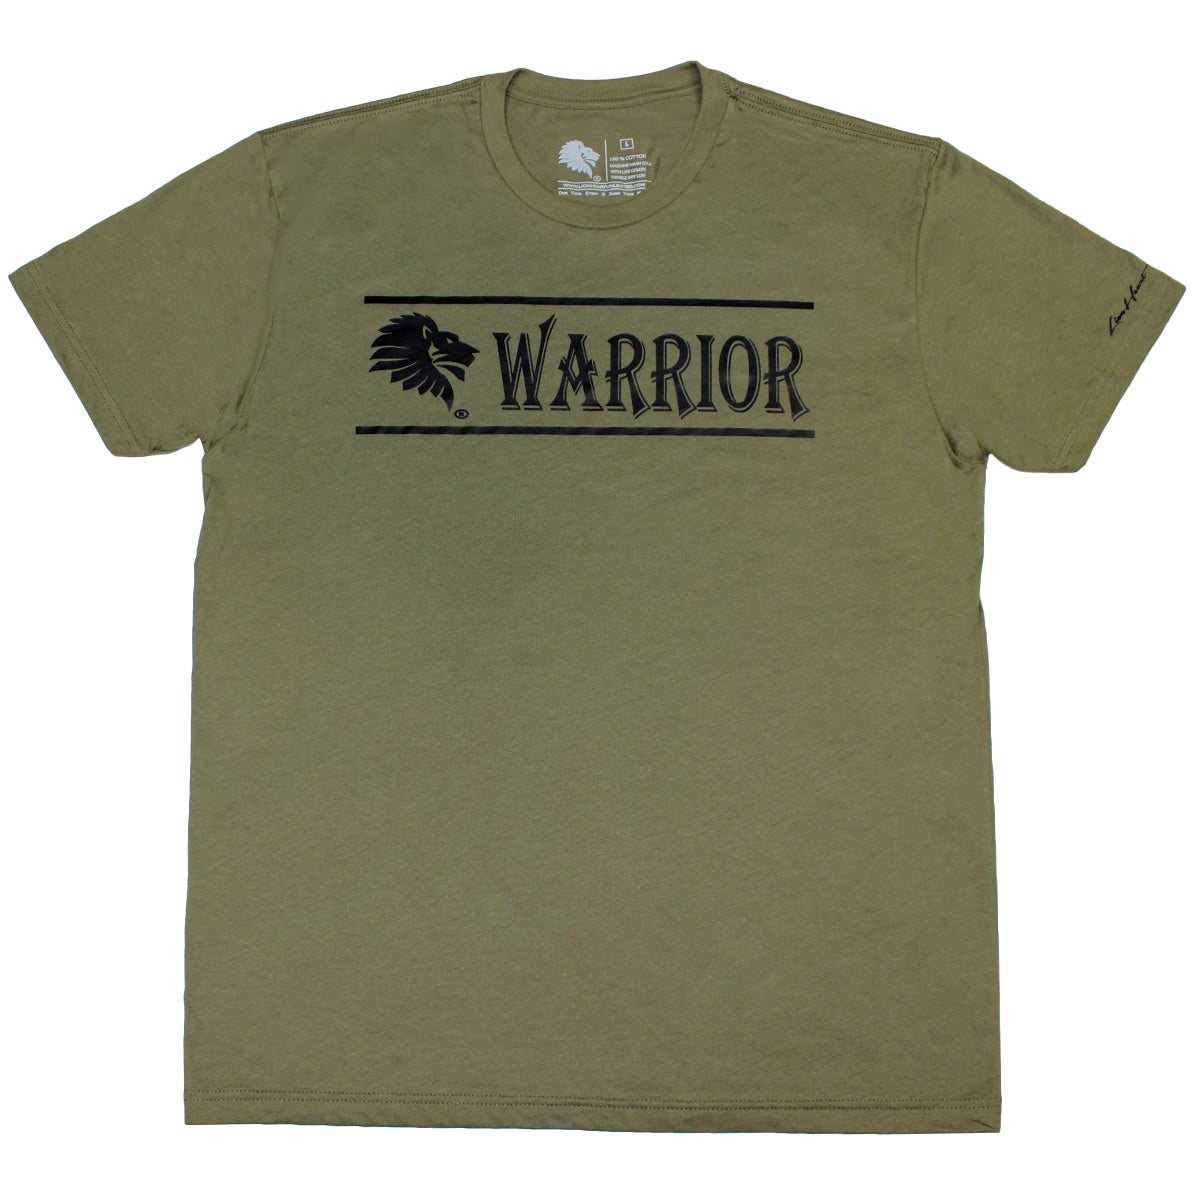 Front View - LHU Warrior Tee - Because you are a Spiritual Soldier. As a Descendant of the King of Kings you possess Warrior Lineage. God has Equipped You to with the Ability to WIN on the field of battle! There's more in you and more that you are connected to than you give yourself credit for! The Warrior Tee expresses to the world clearly that you are a Warrior and equipped to WIN on the battlefield!